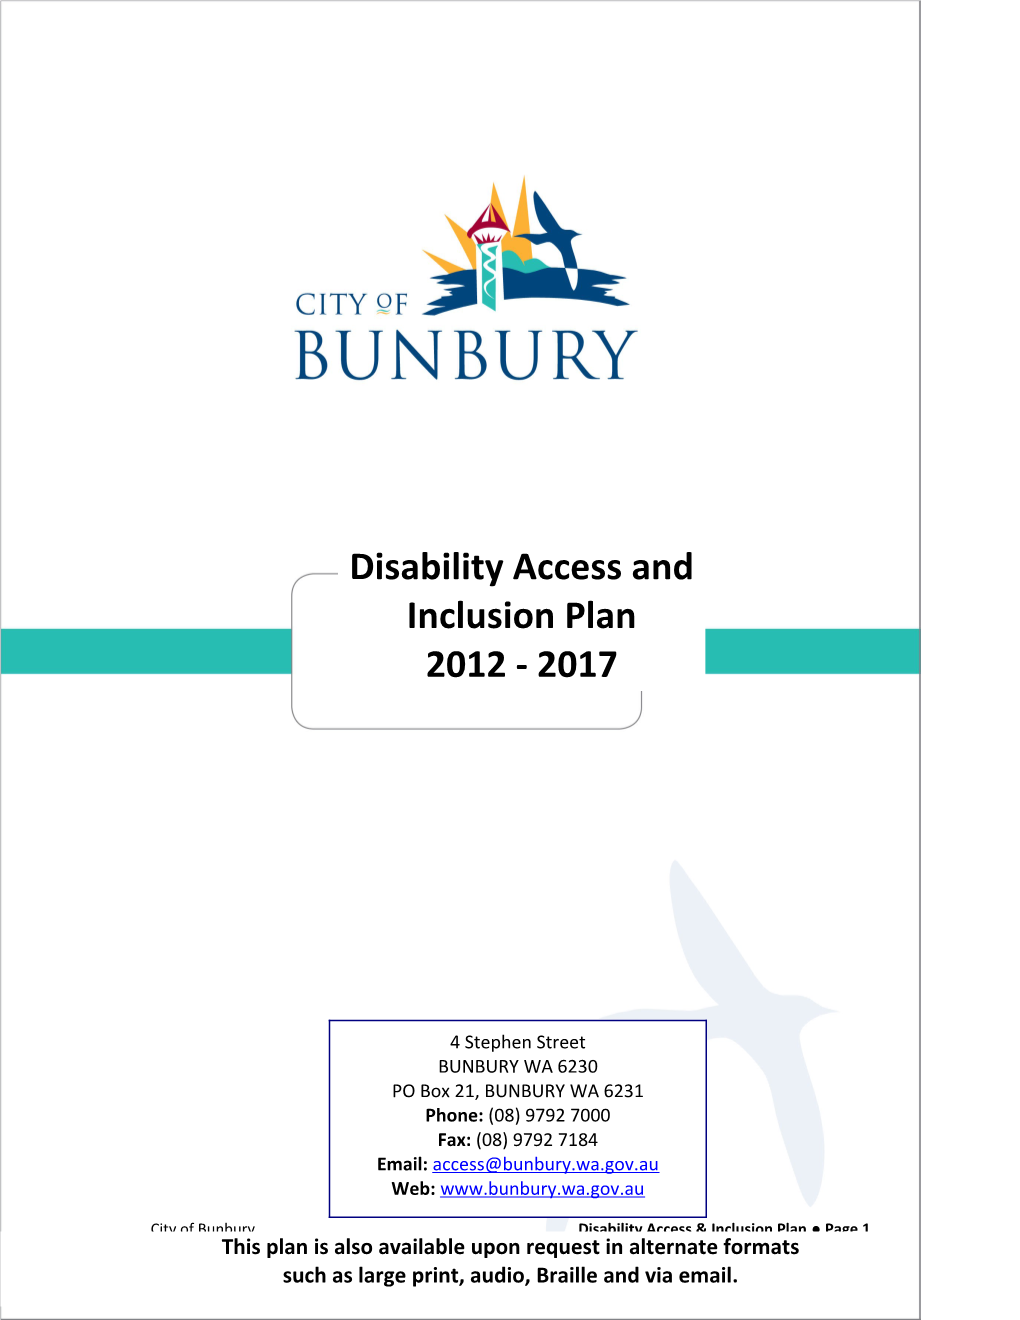 Model Disability Access and Inclusion Plans